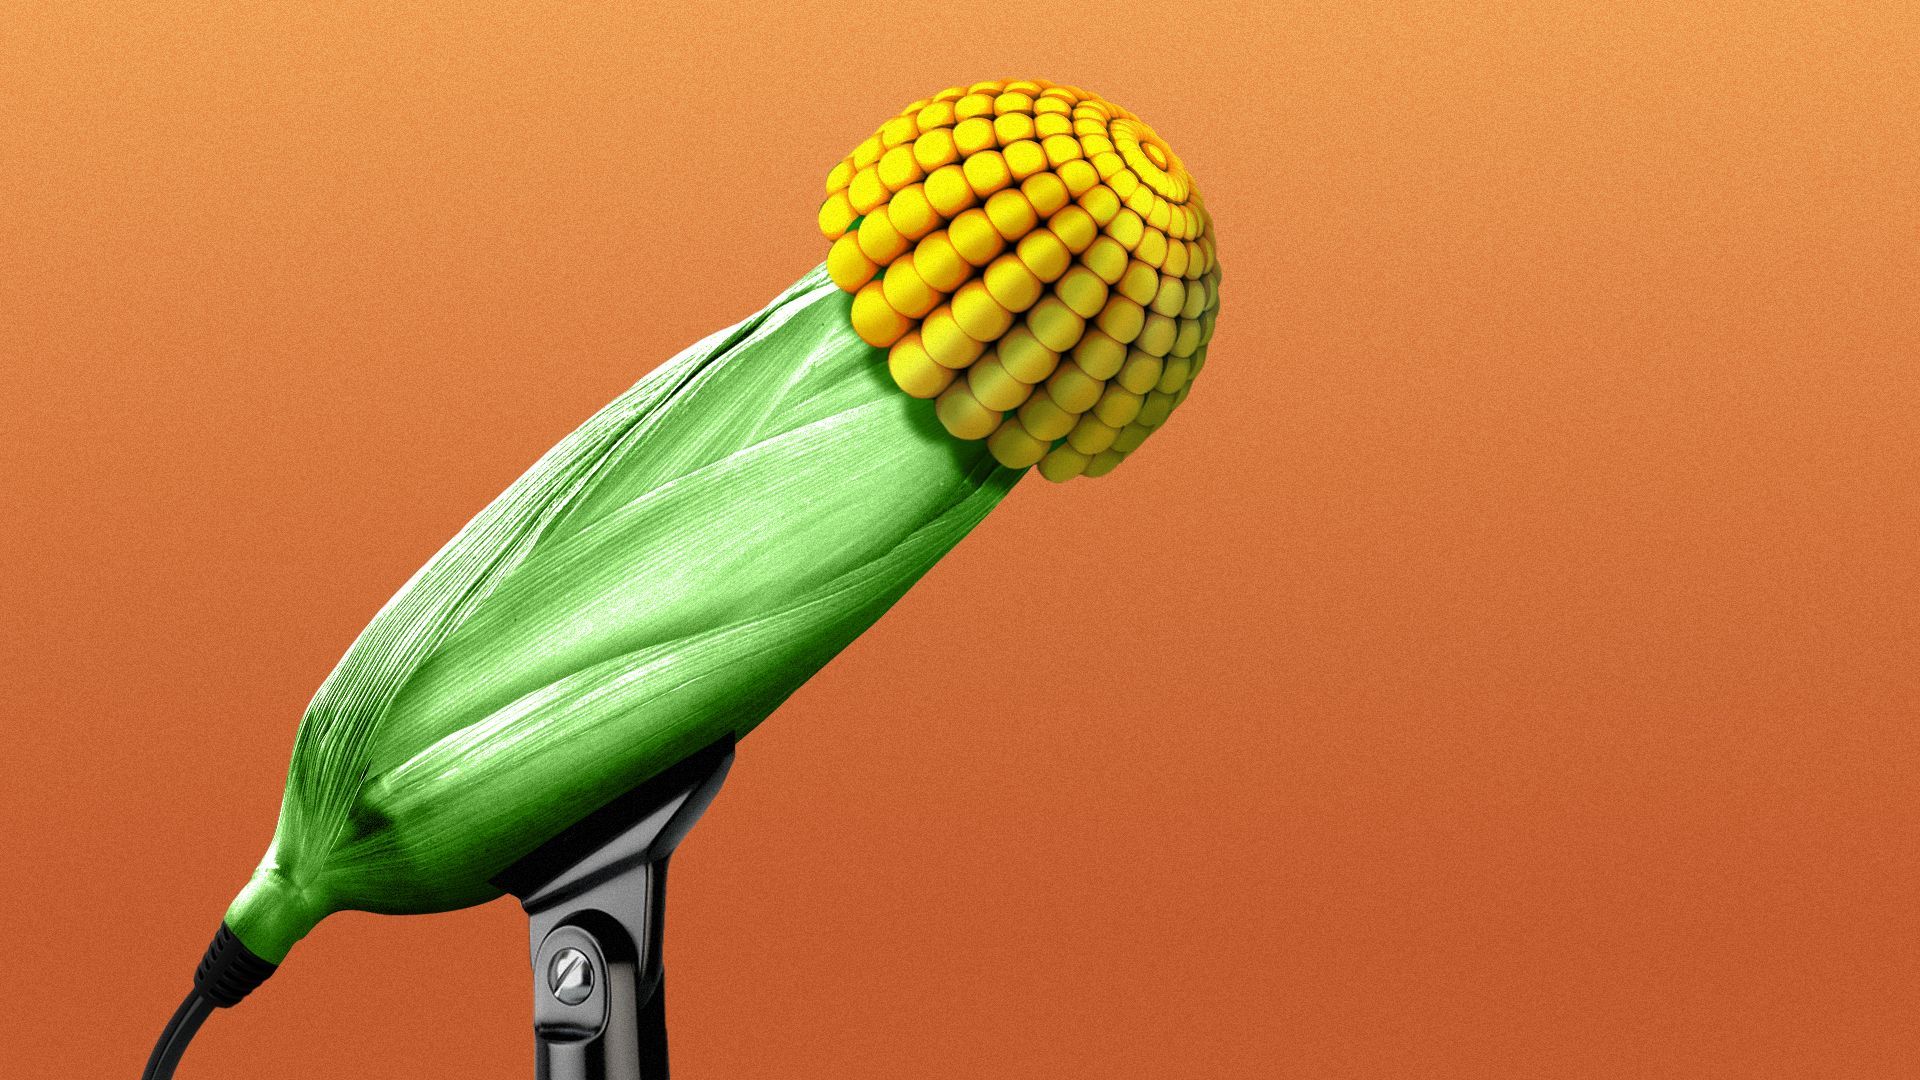 Illustration of a cob of corn in the shape of a microphone.